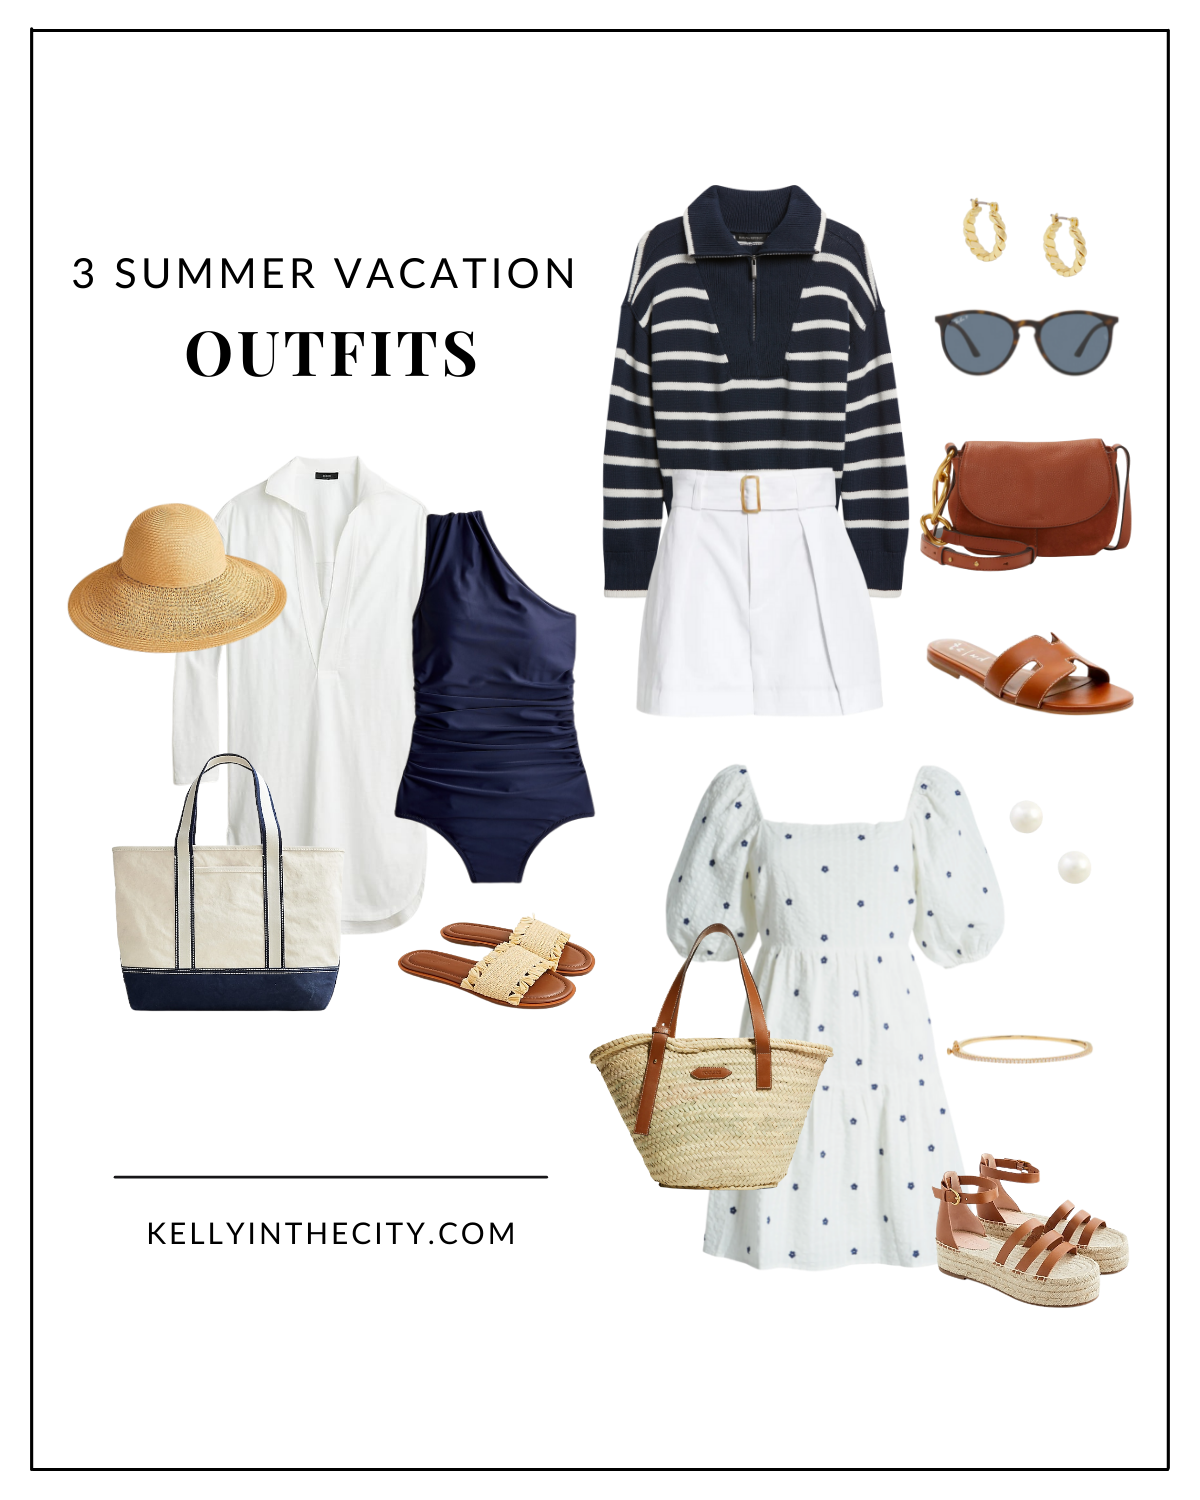 3 Summer Vacation Outfit Ideas, Kelly in the City